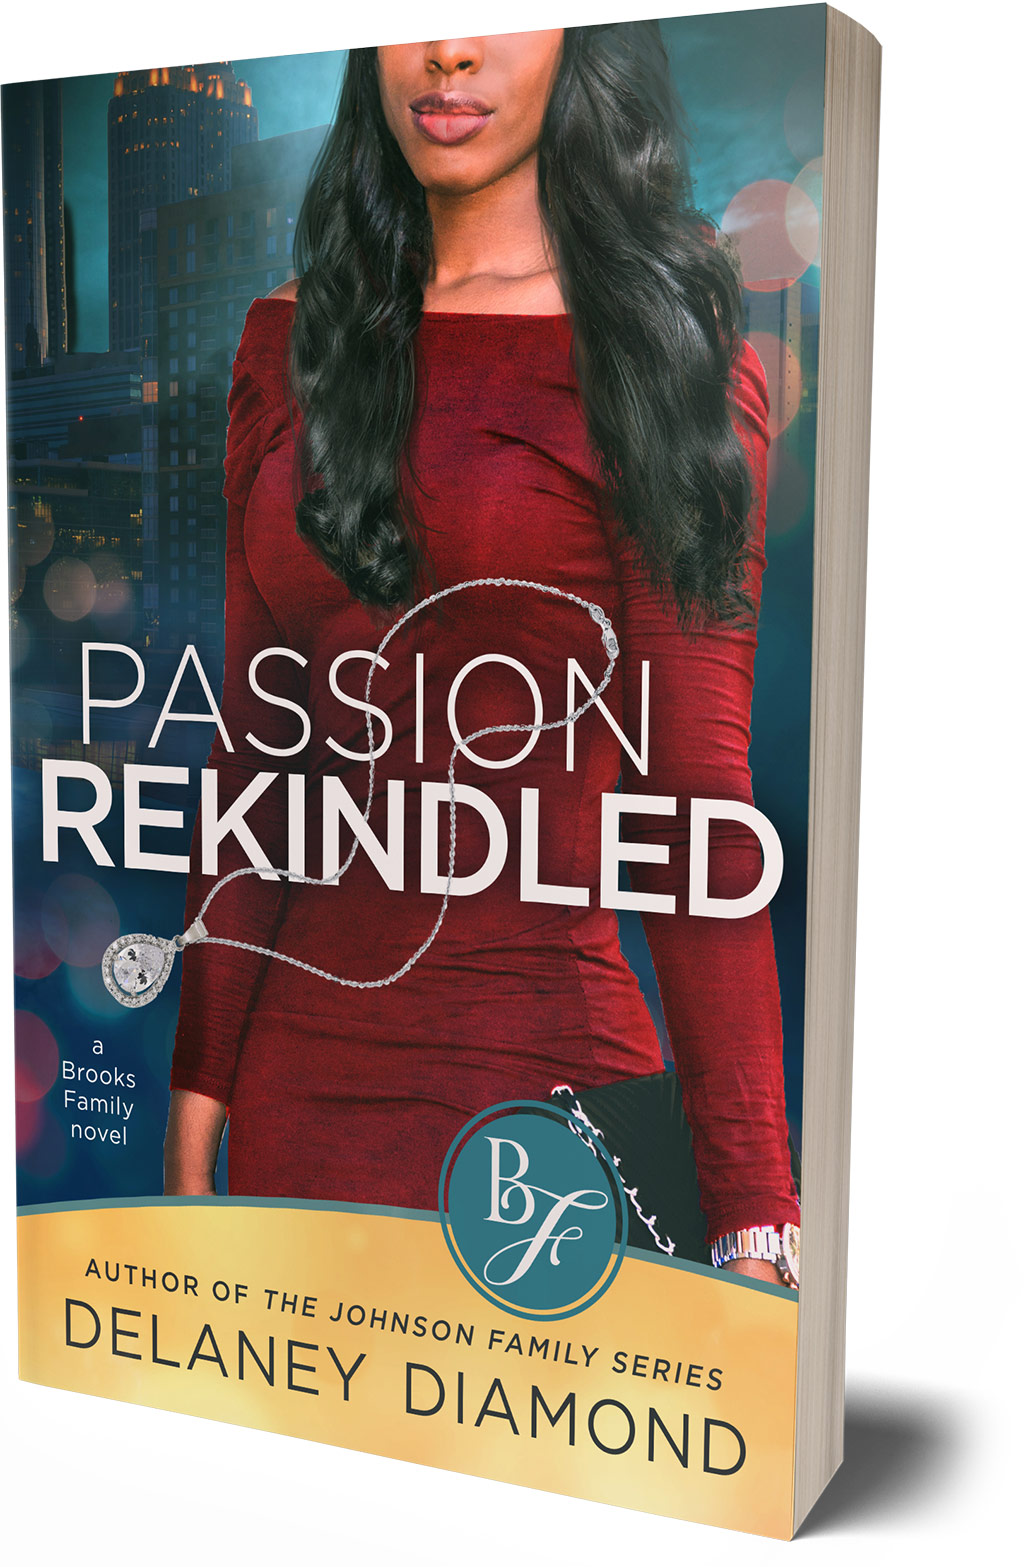 Passion Rekindled, The Brooks Family Book 2, by Delaney Diamond